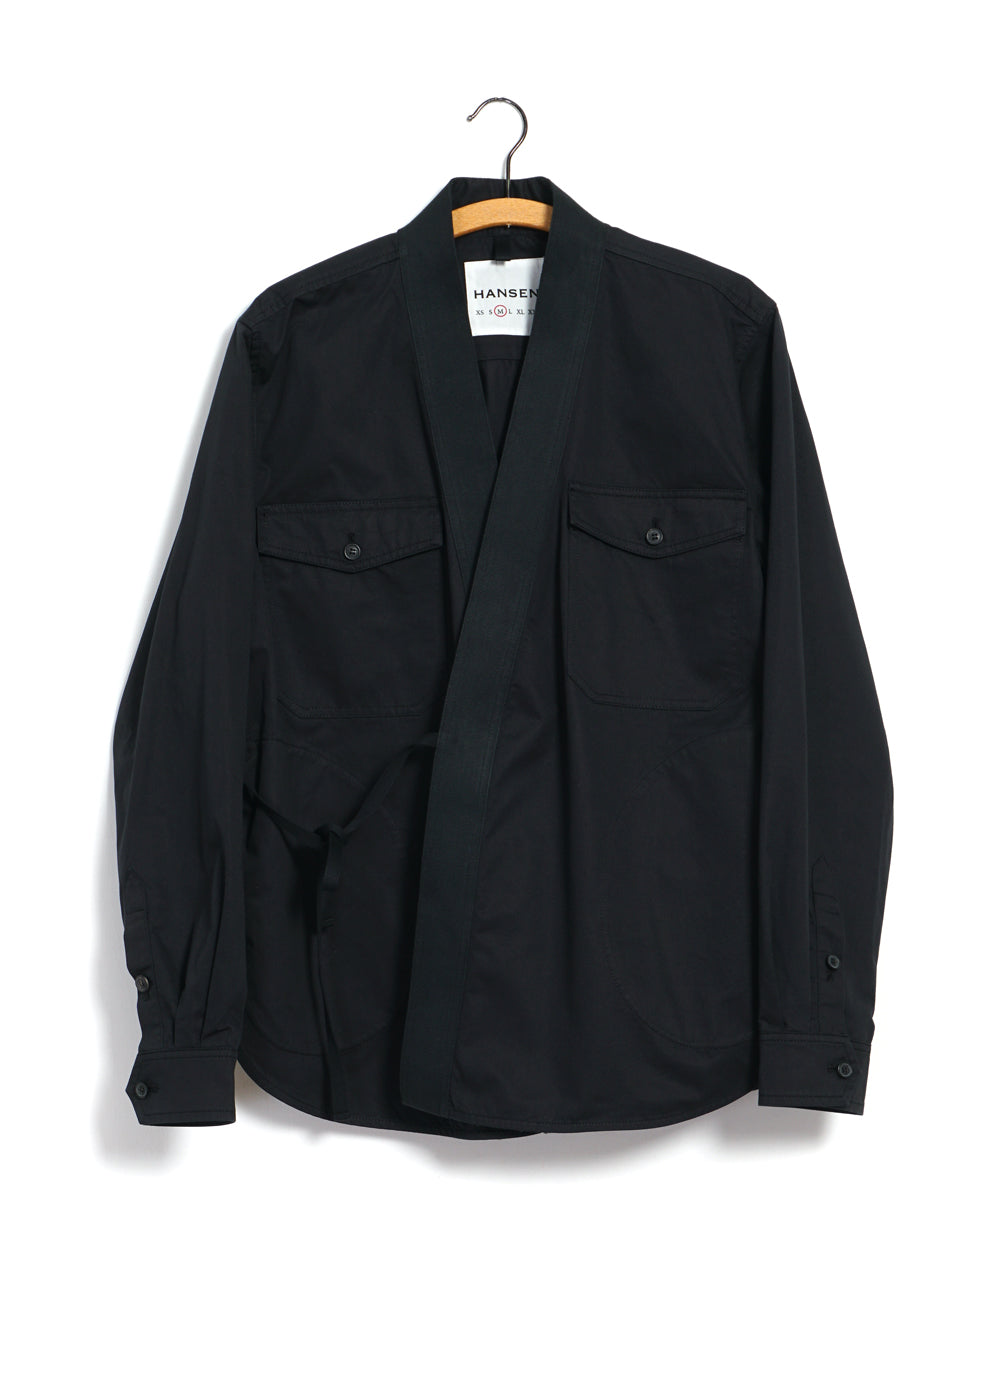 REMY | East & West Shirt Jacket | Black Drill